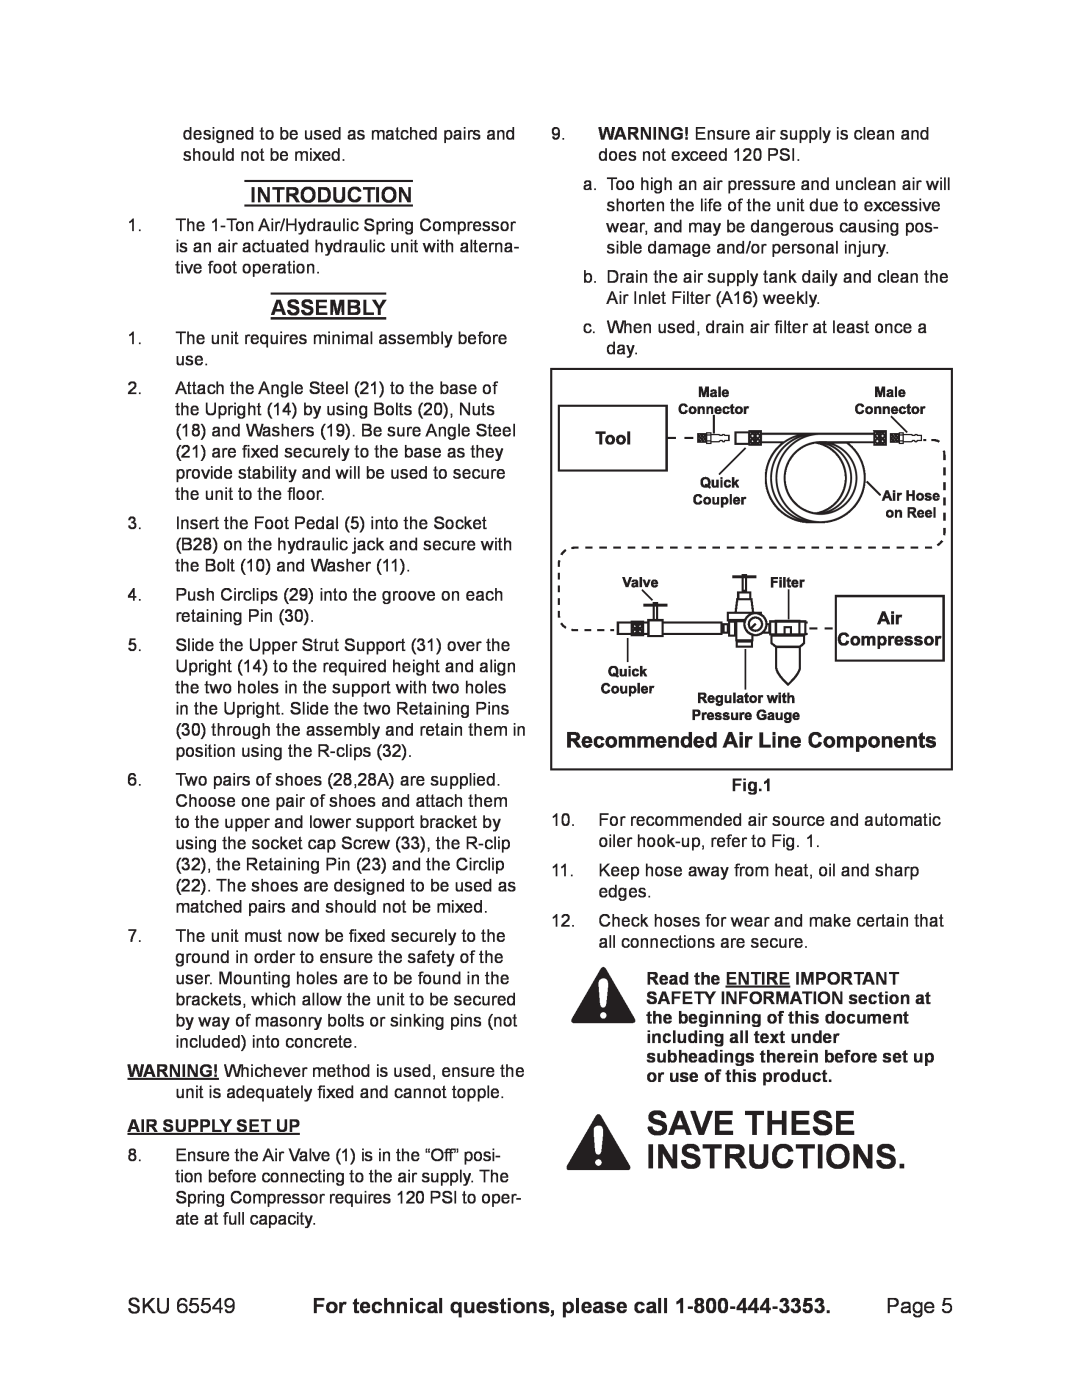 Harbor Freight Tools 65549 manual Save these instructions, Page, Air Supply Set Up 